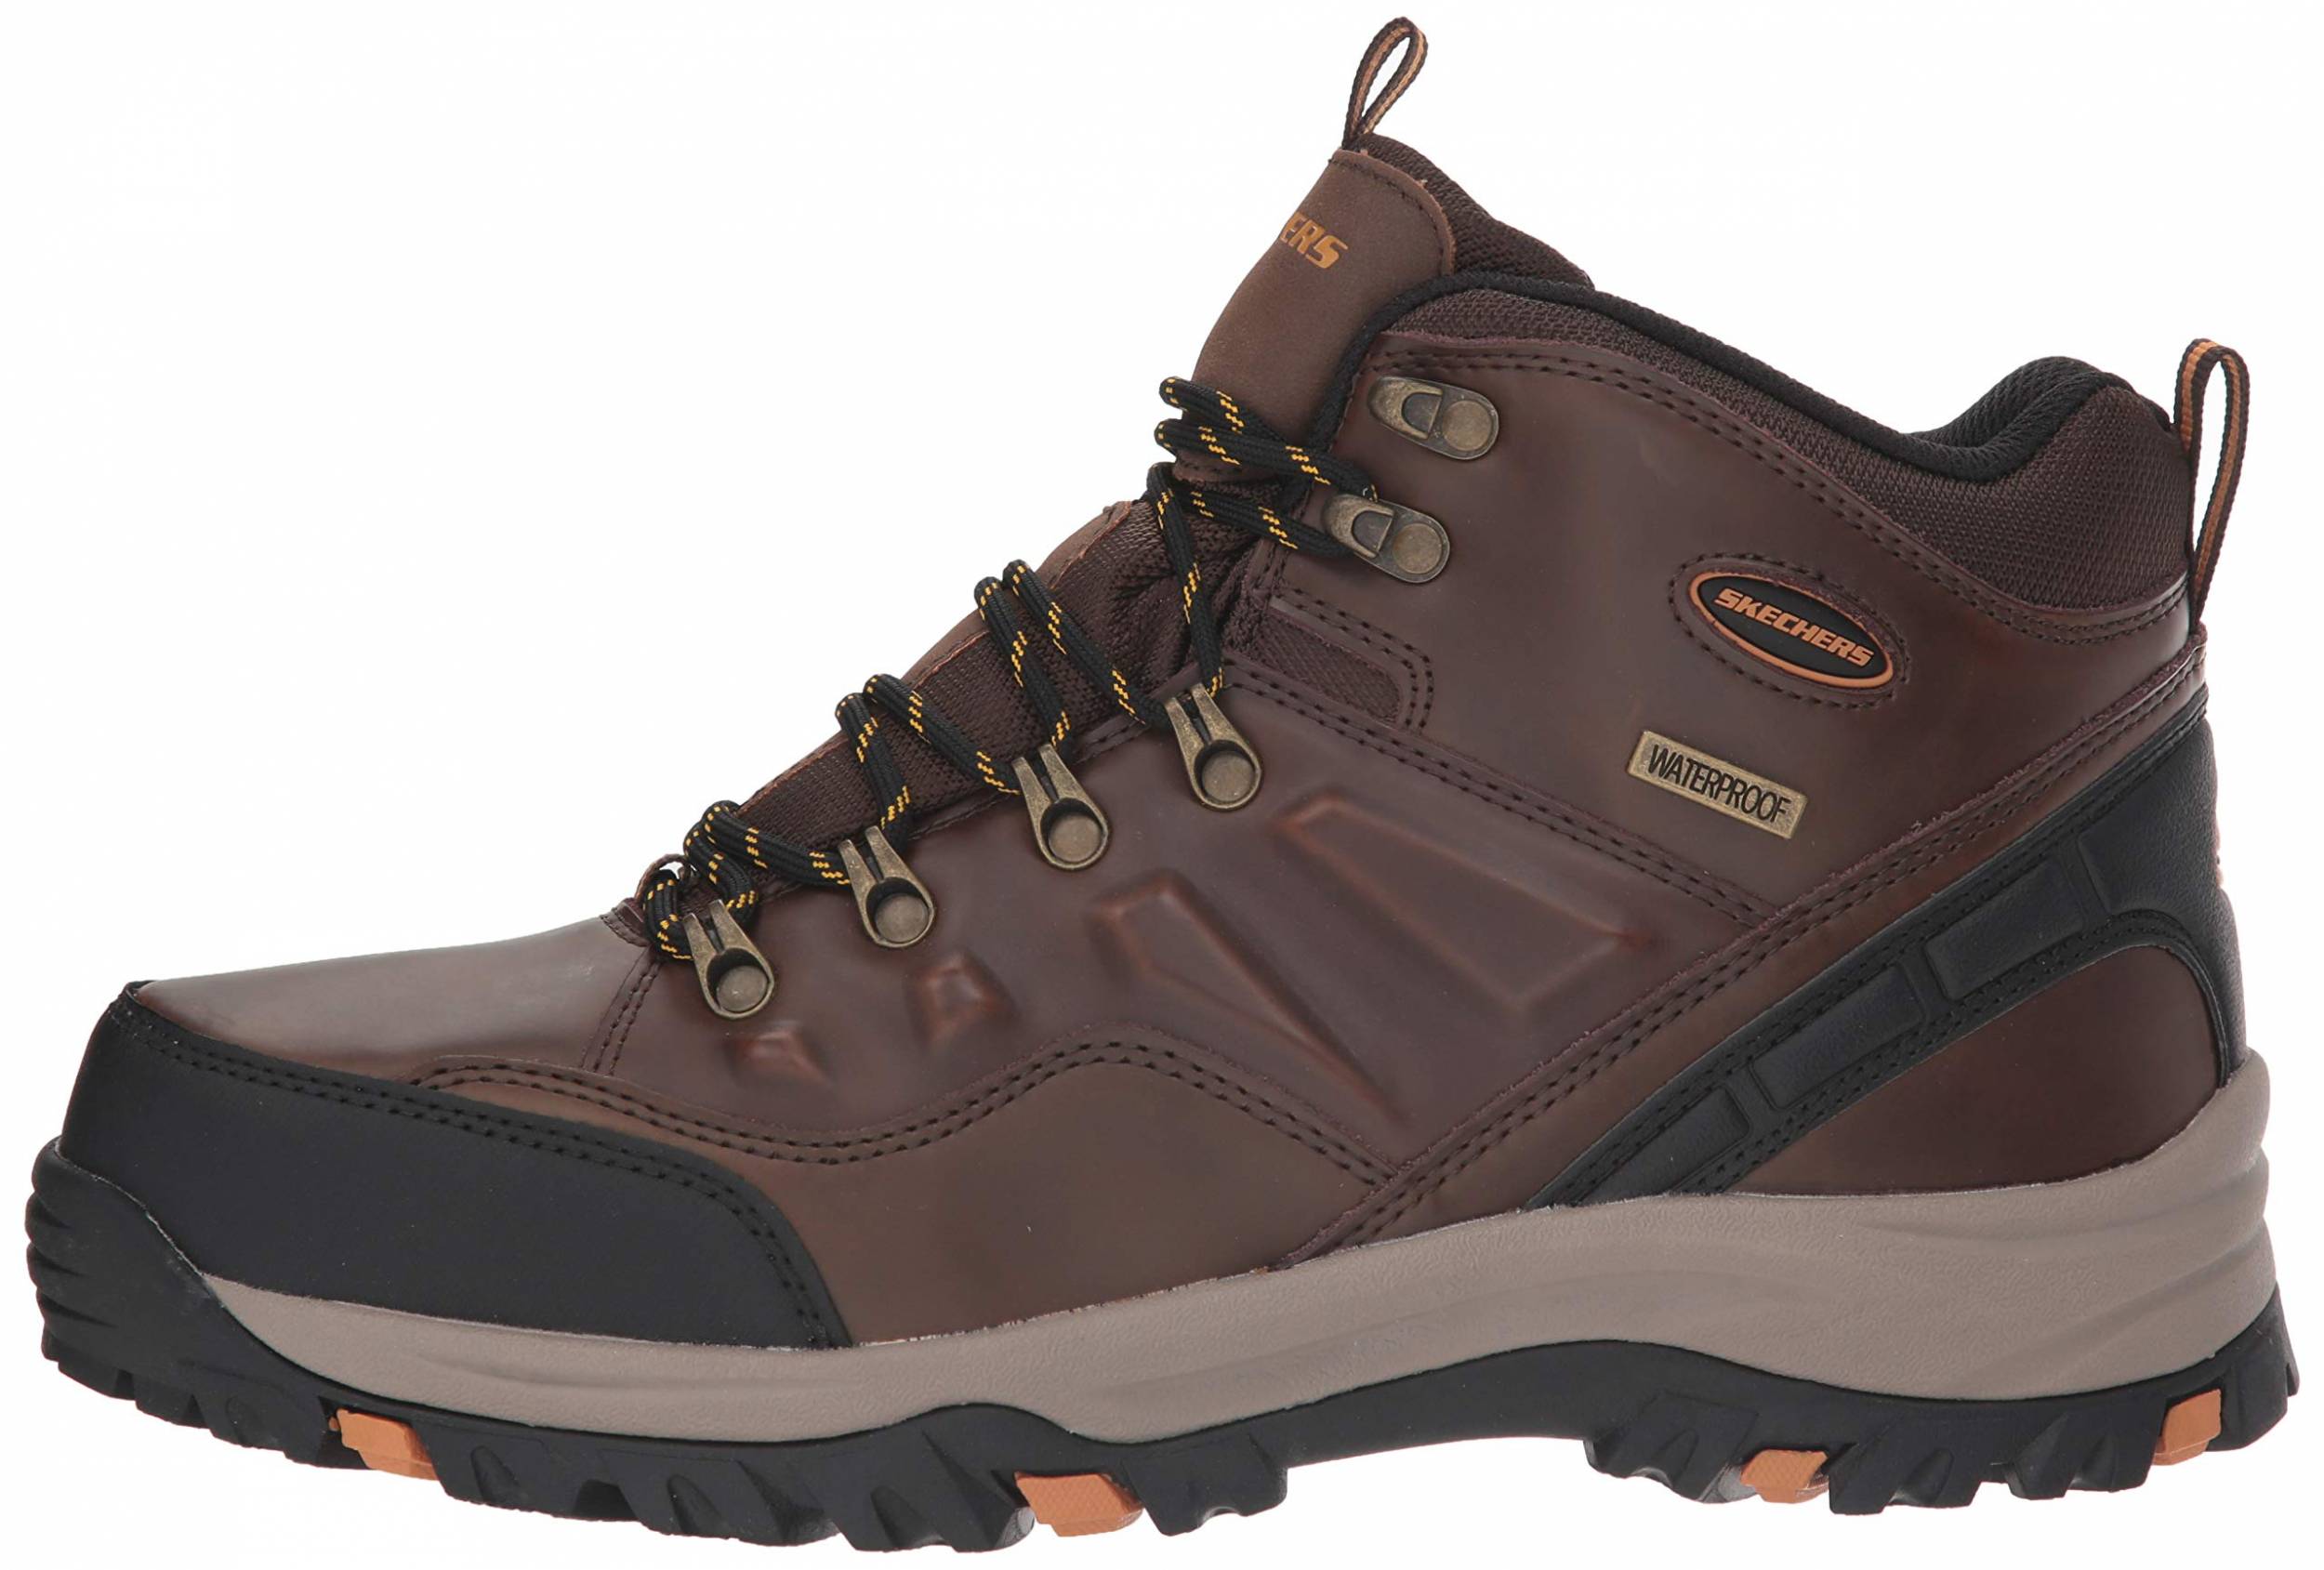 Save 40% on Skechers Hiking Boots (2 